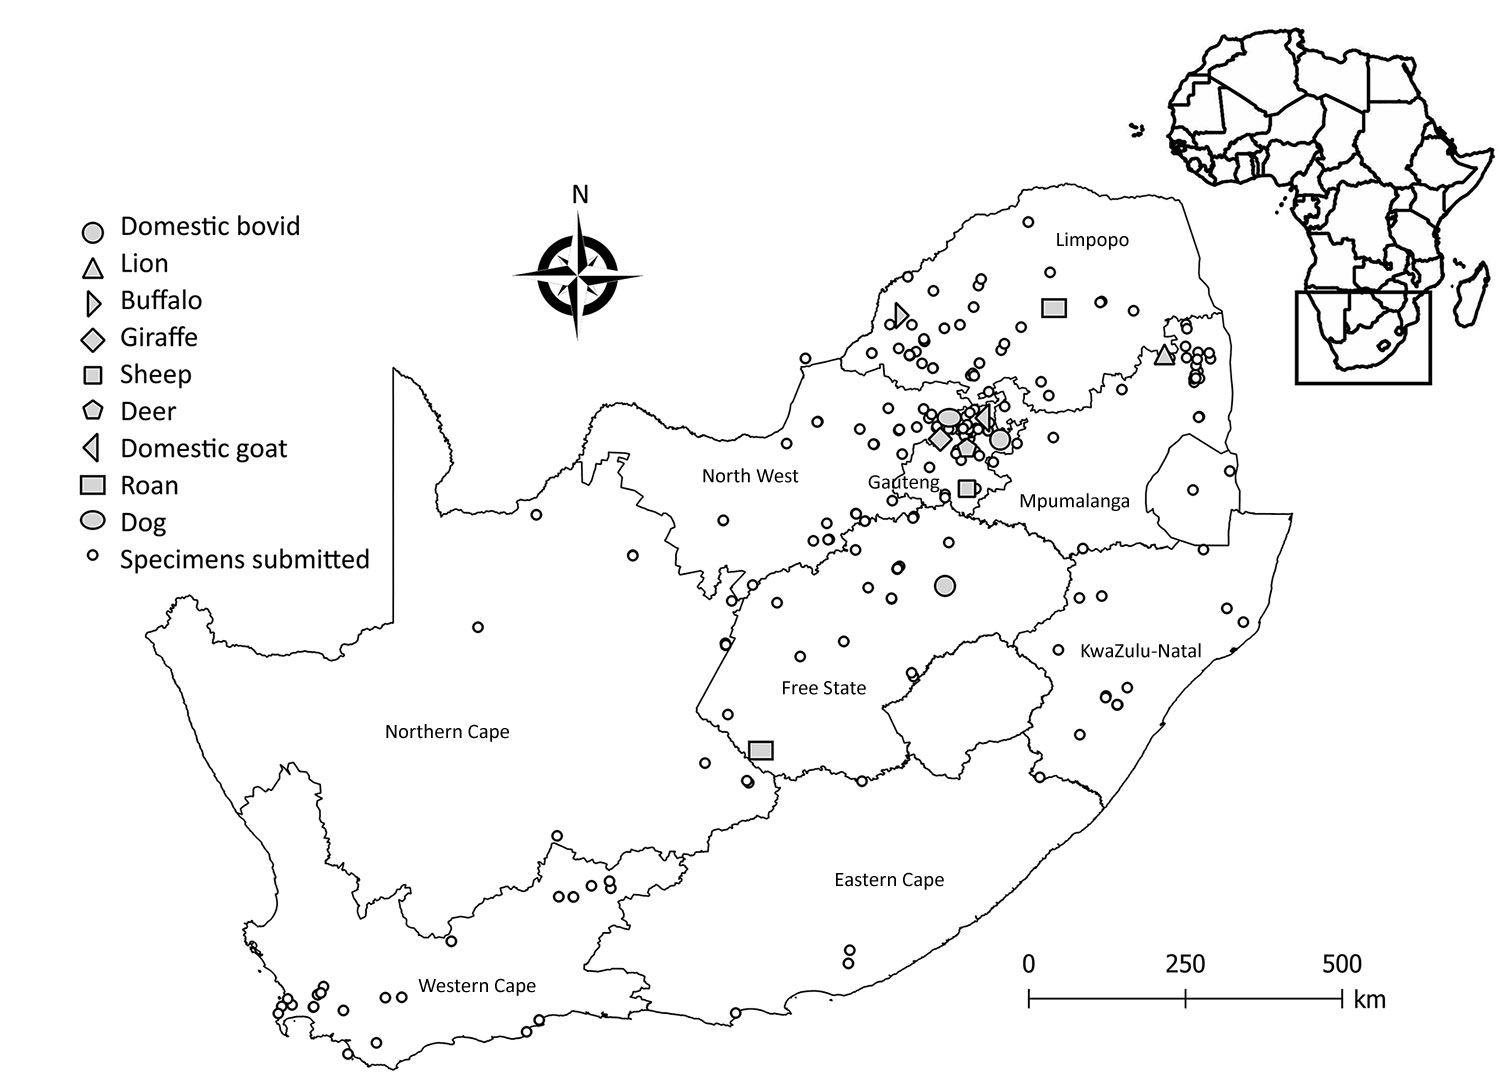 Areas where West Nile virus infections were detected in wildlife and nonequine domestic animals, South Africa, 2010–2018. Insert indicates location of South Africa in Africa.